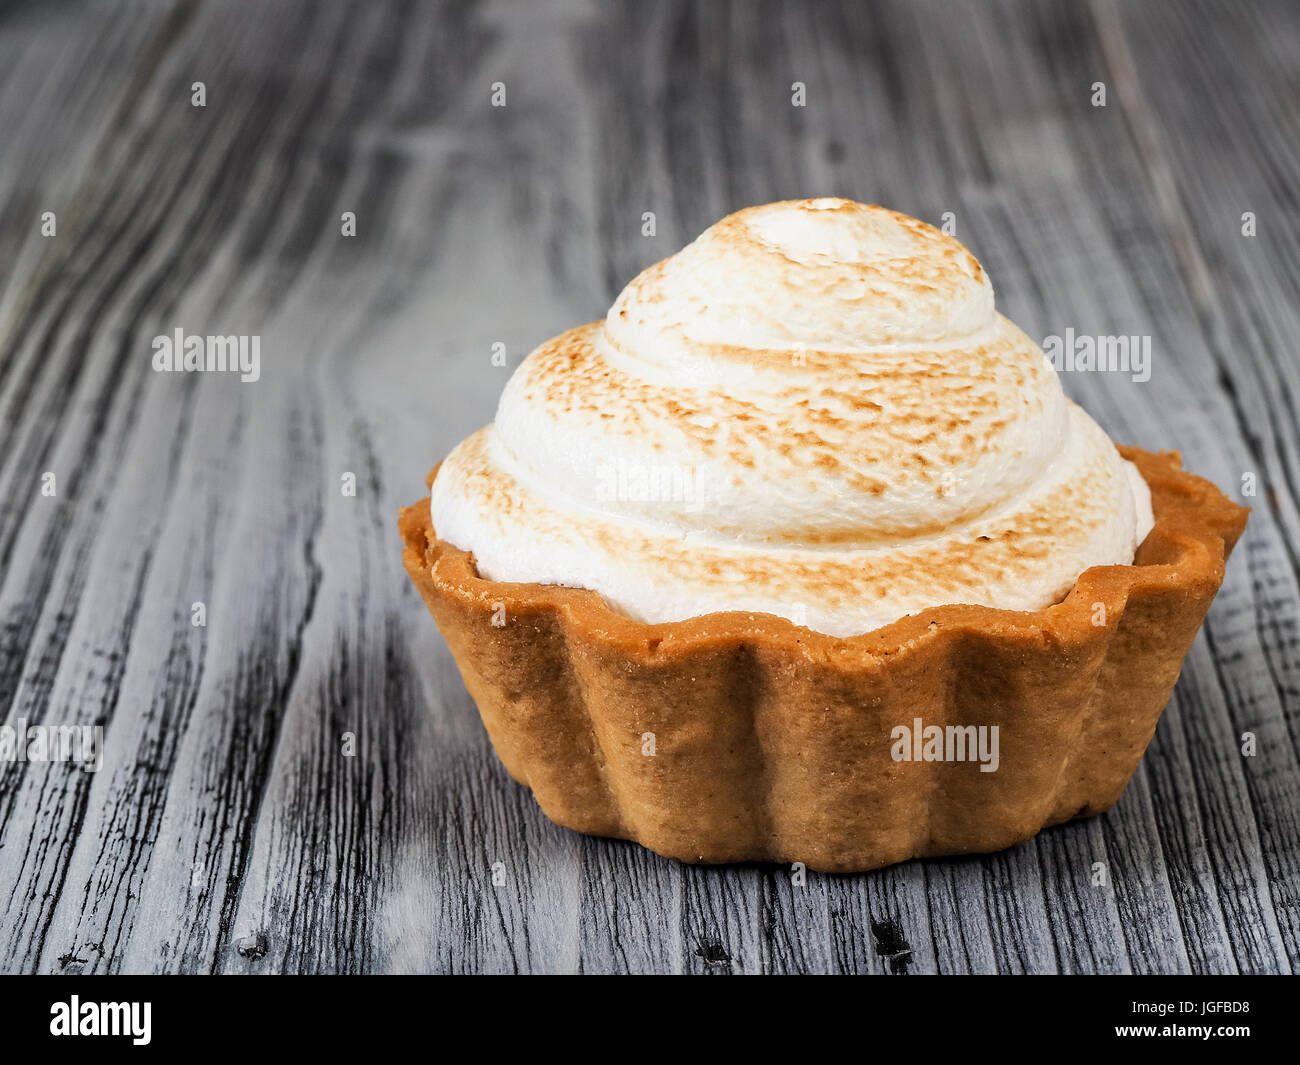 Tasty muffin cake on the wood Stock Photo